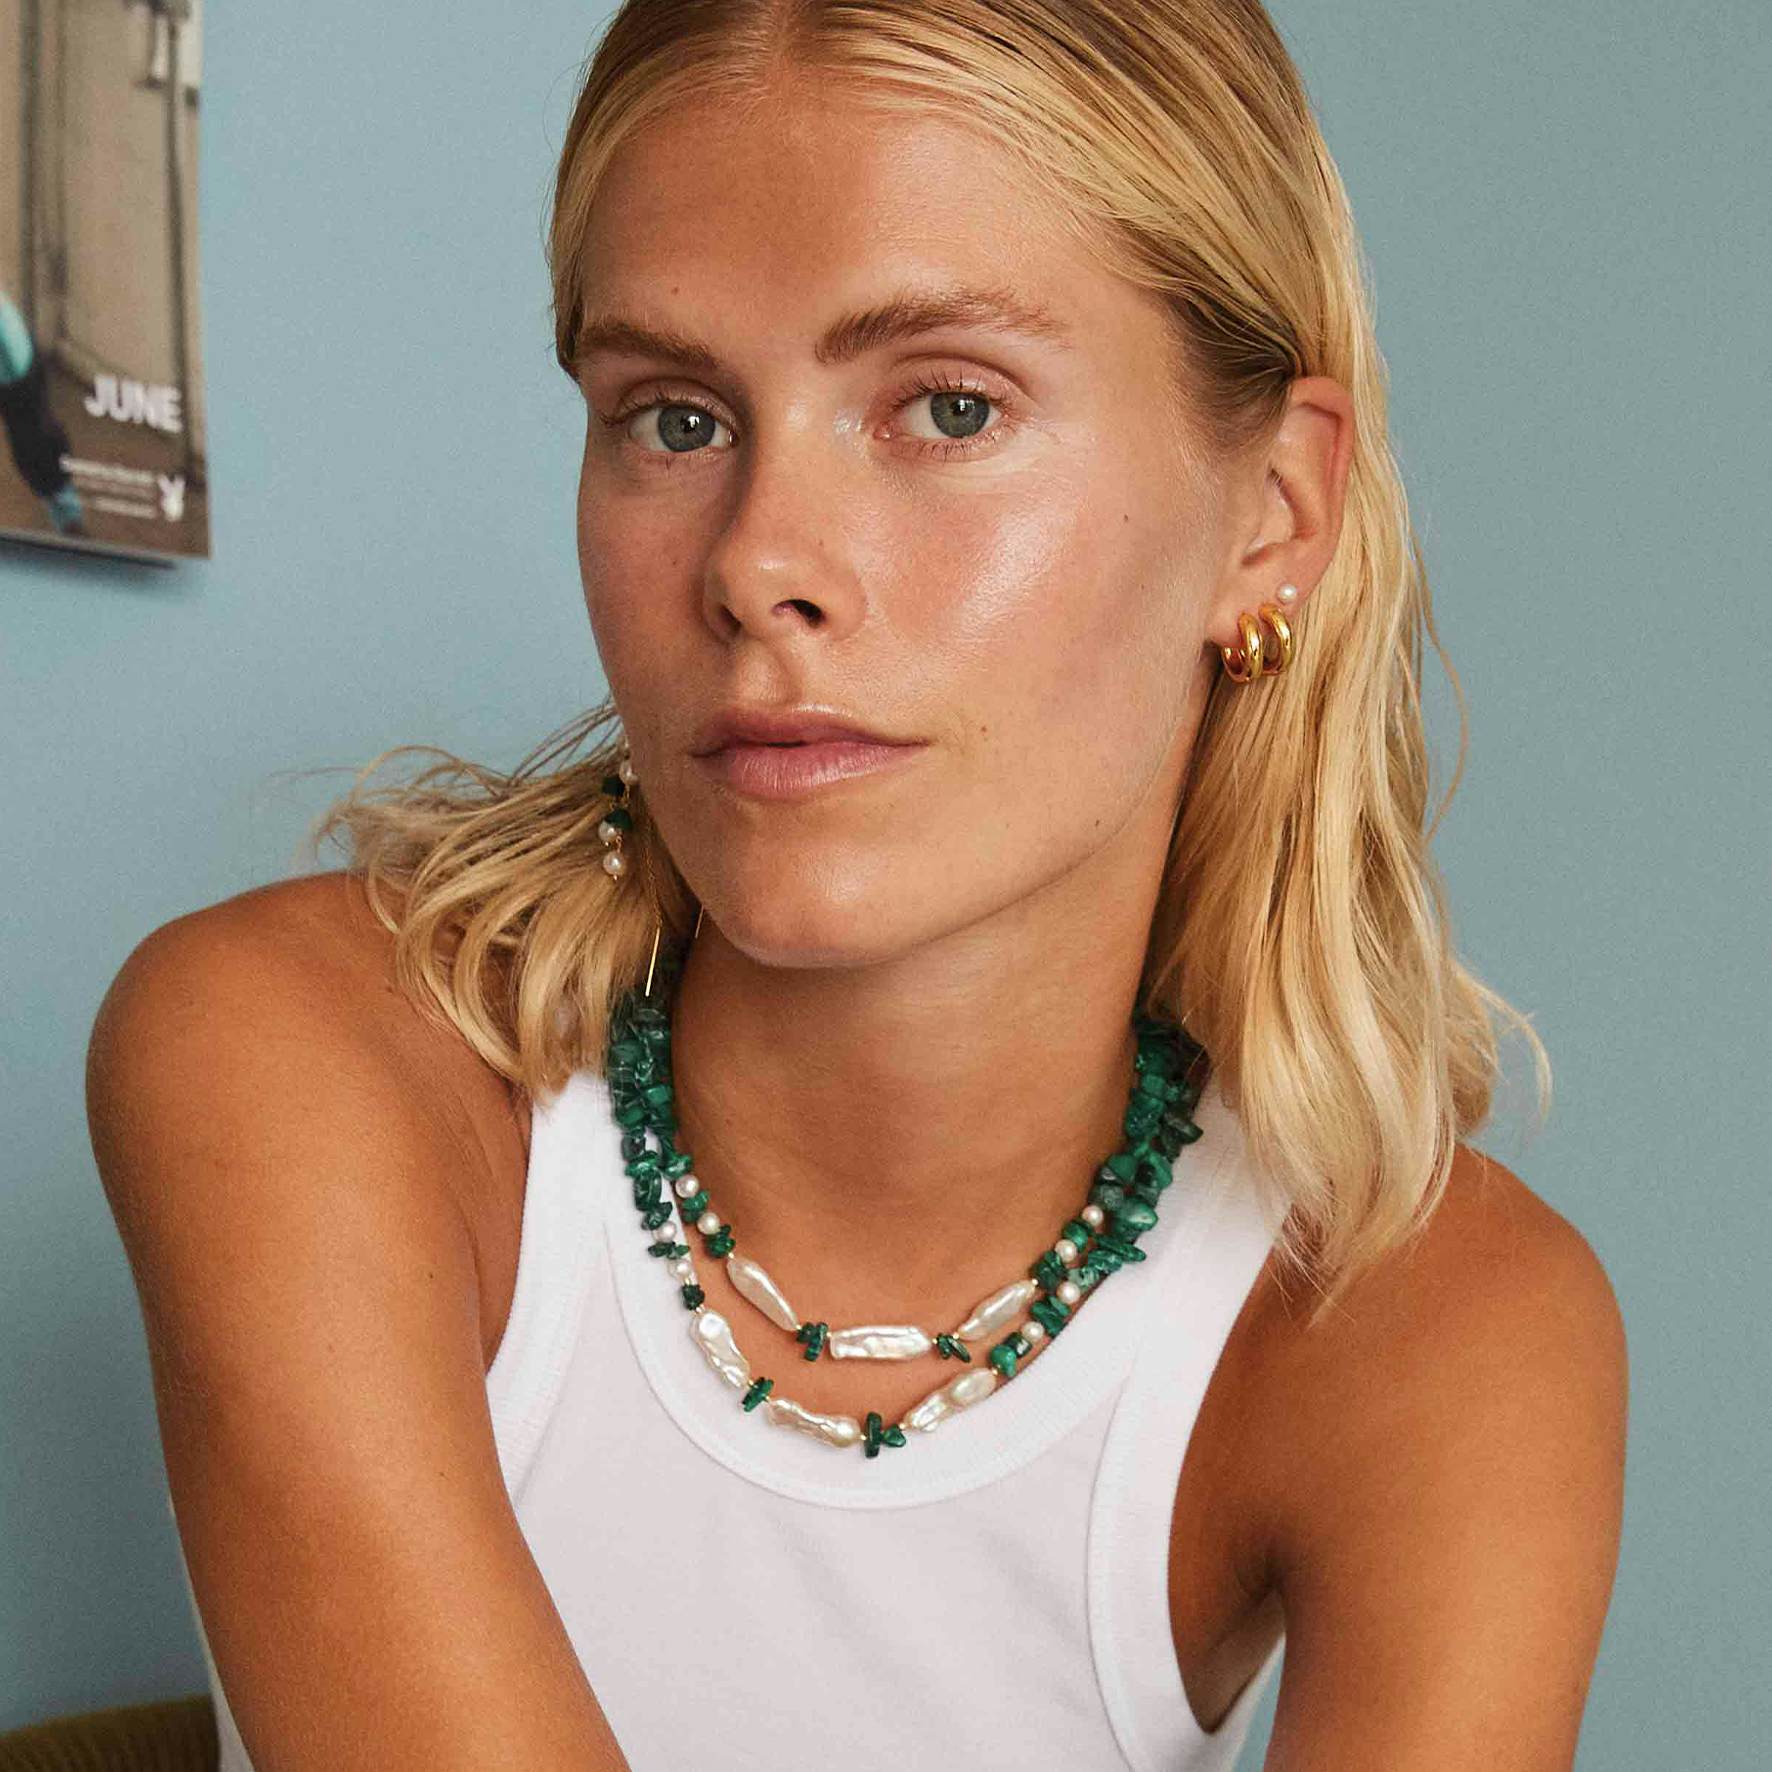 Green Ellie Necklace from Hultquist Copenhagen in Goldplated-Silver Sterling 925| ,Freshwater Pearl|Blank